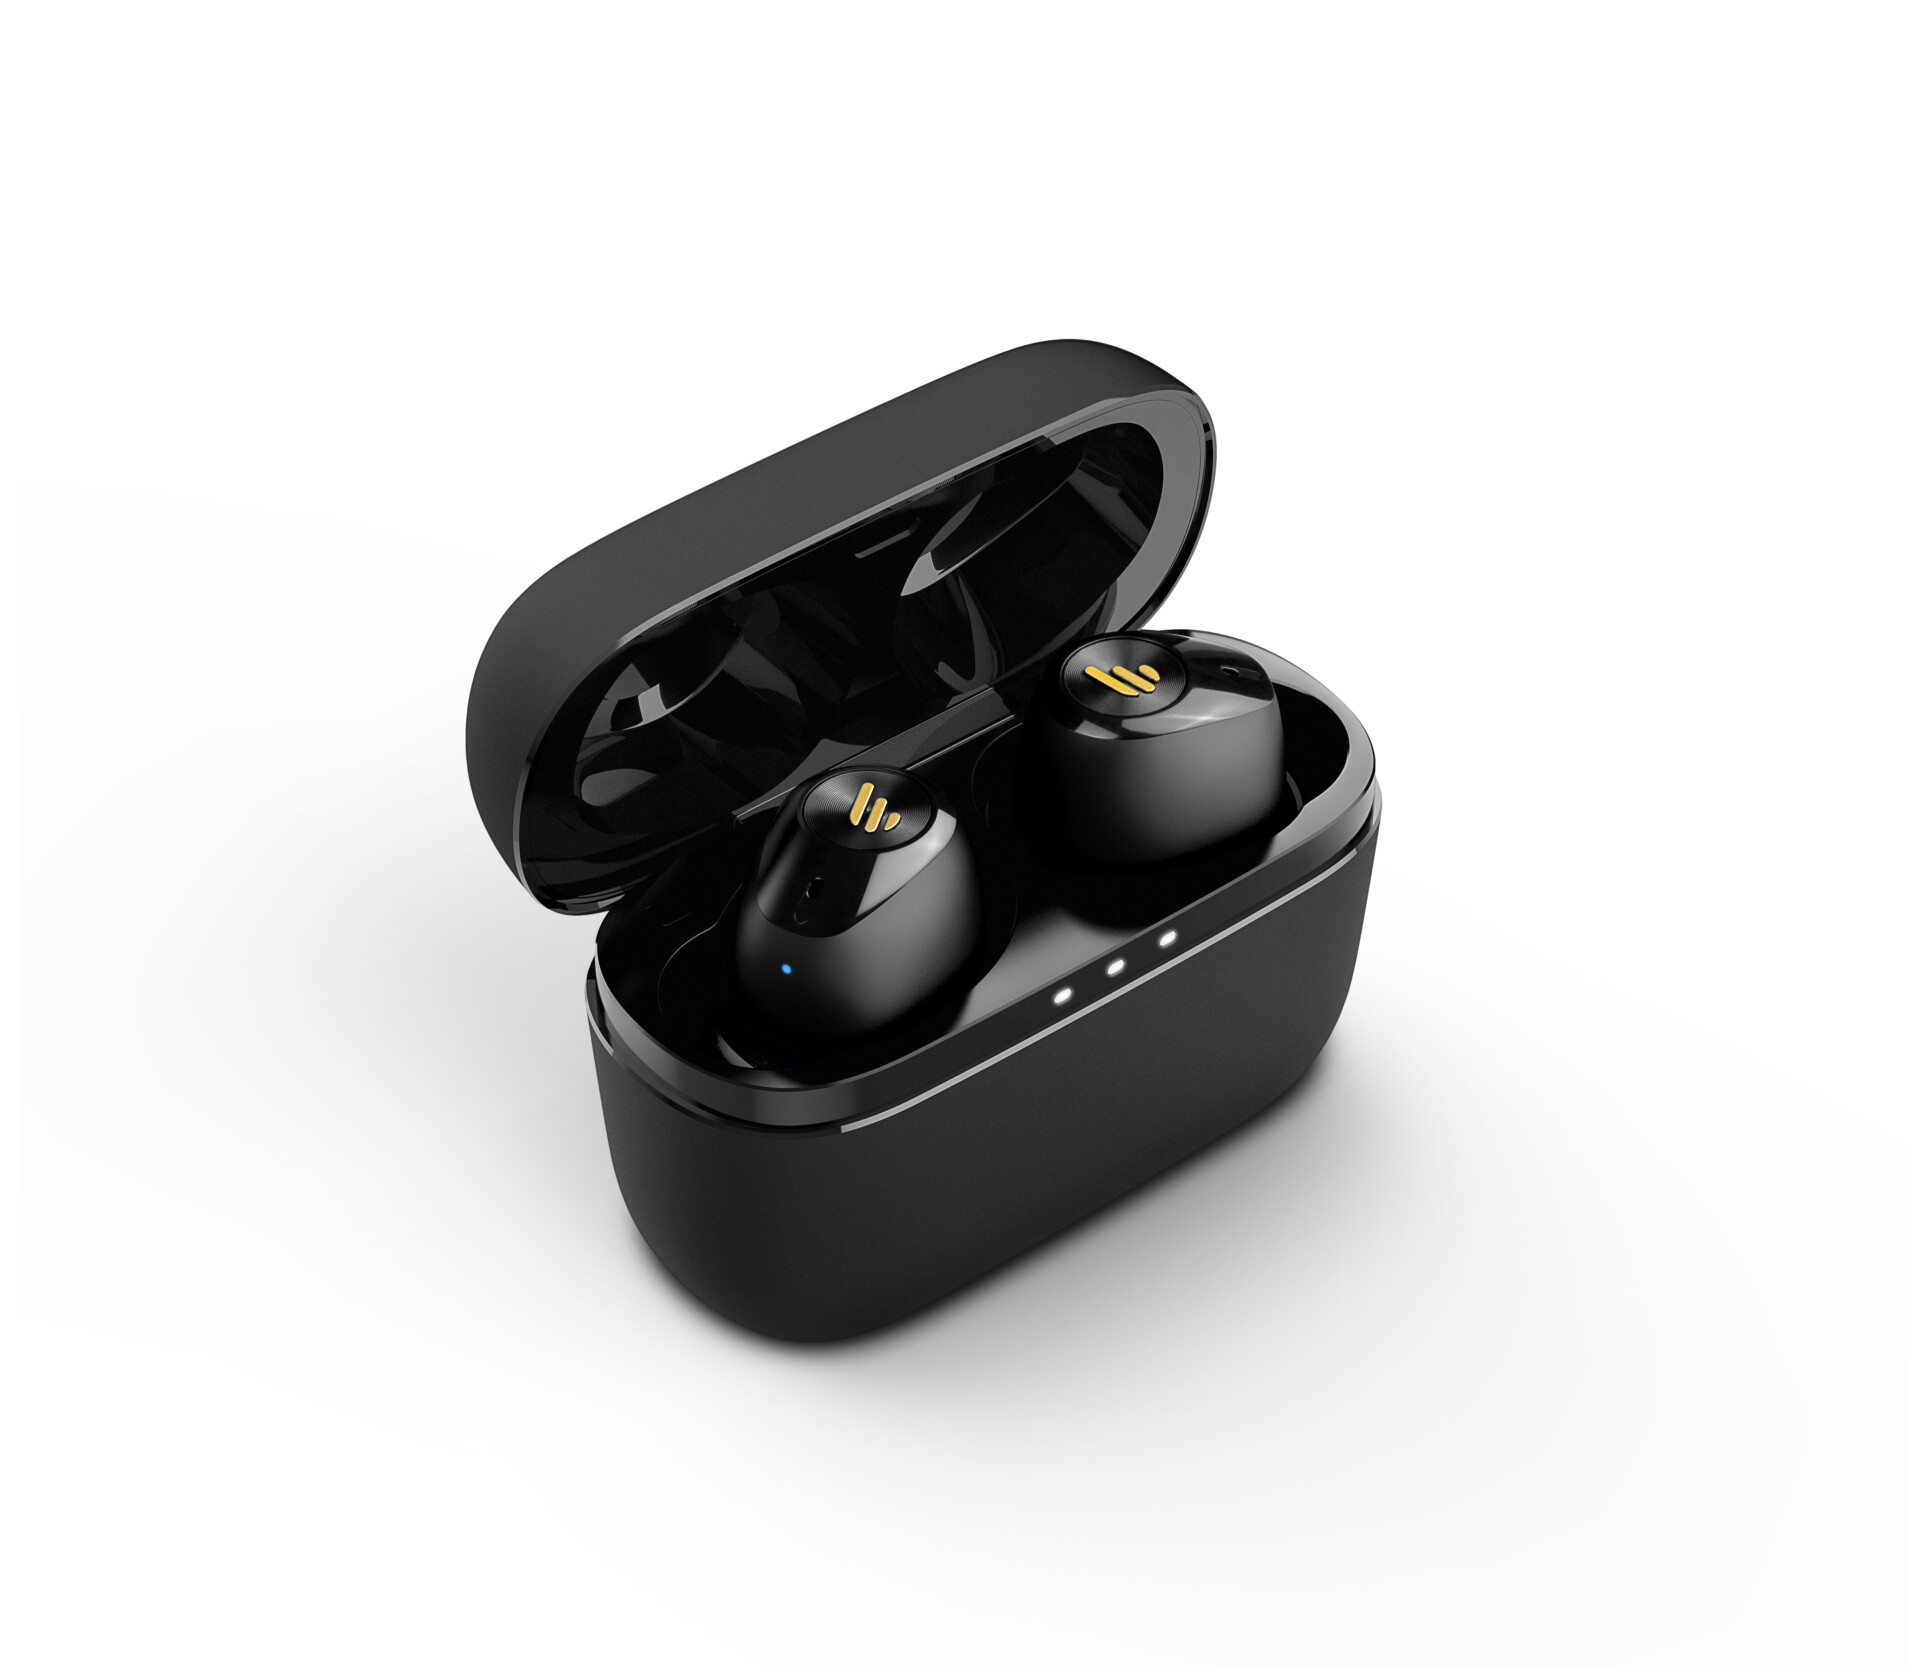 Edifier TWS2 in black product image with both earbuds resting in the charging case.